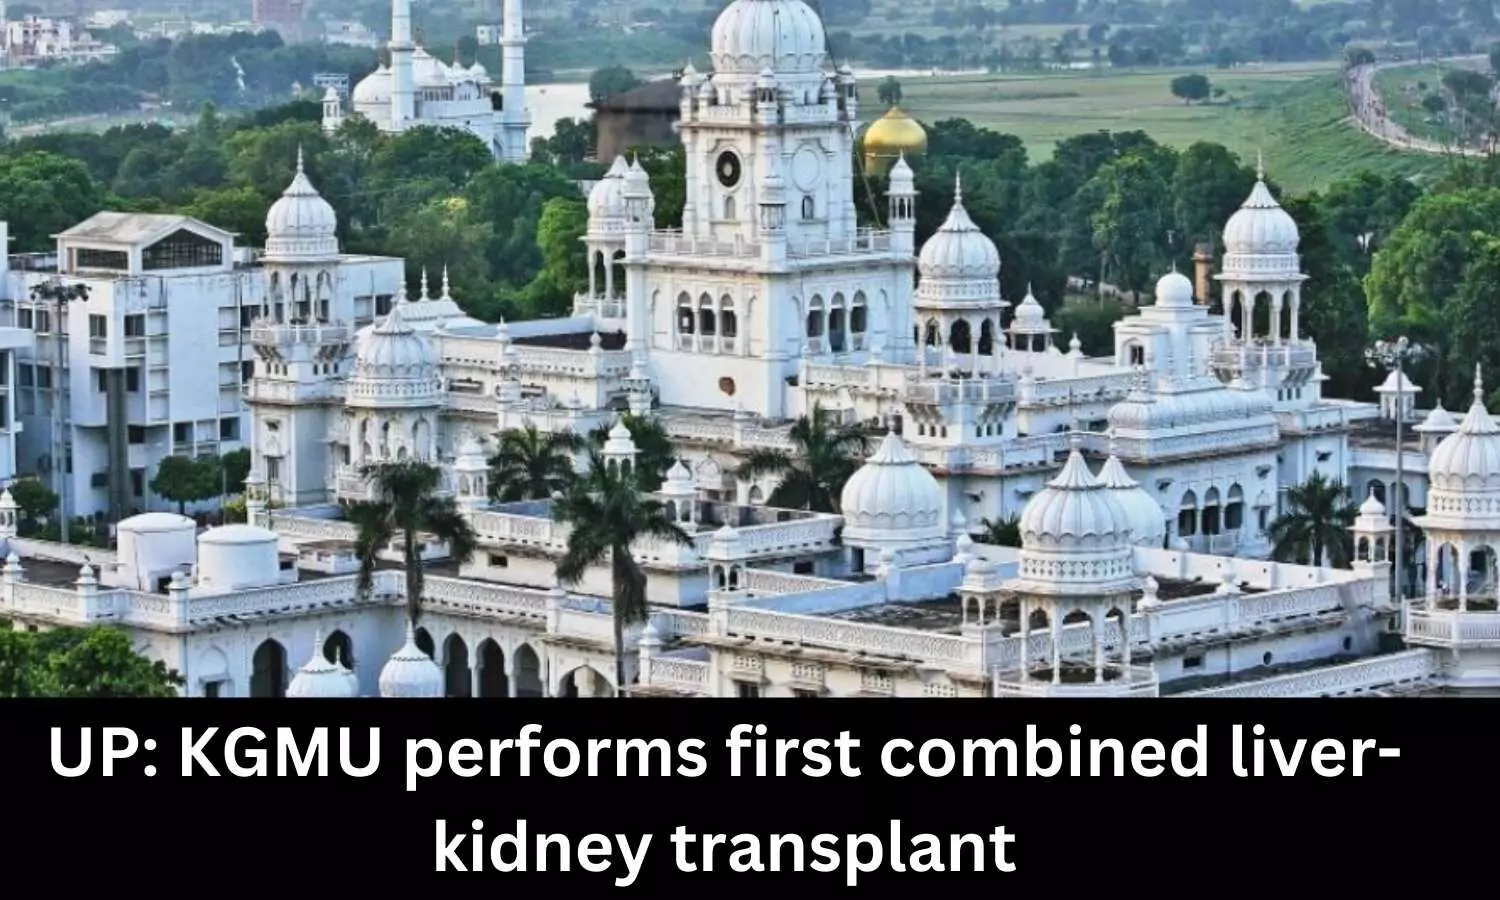 King Georges Medical University performs first combined liver-kidney transplant